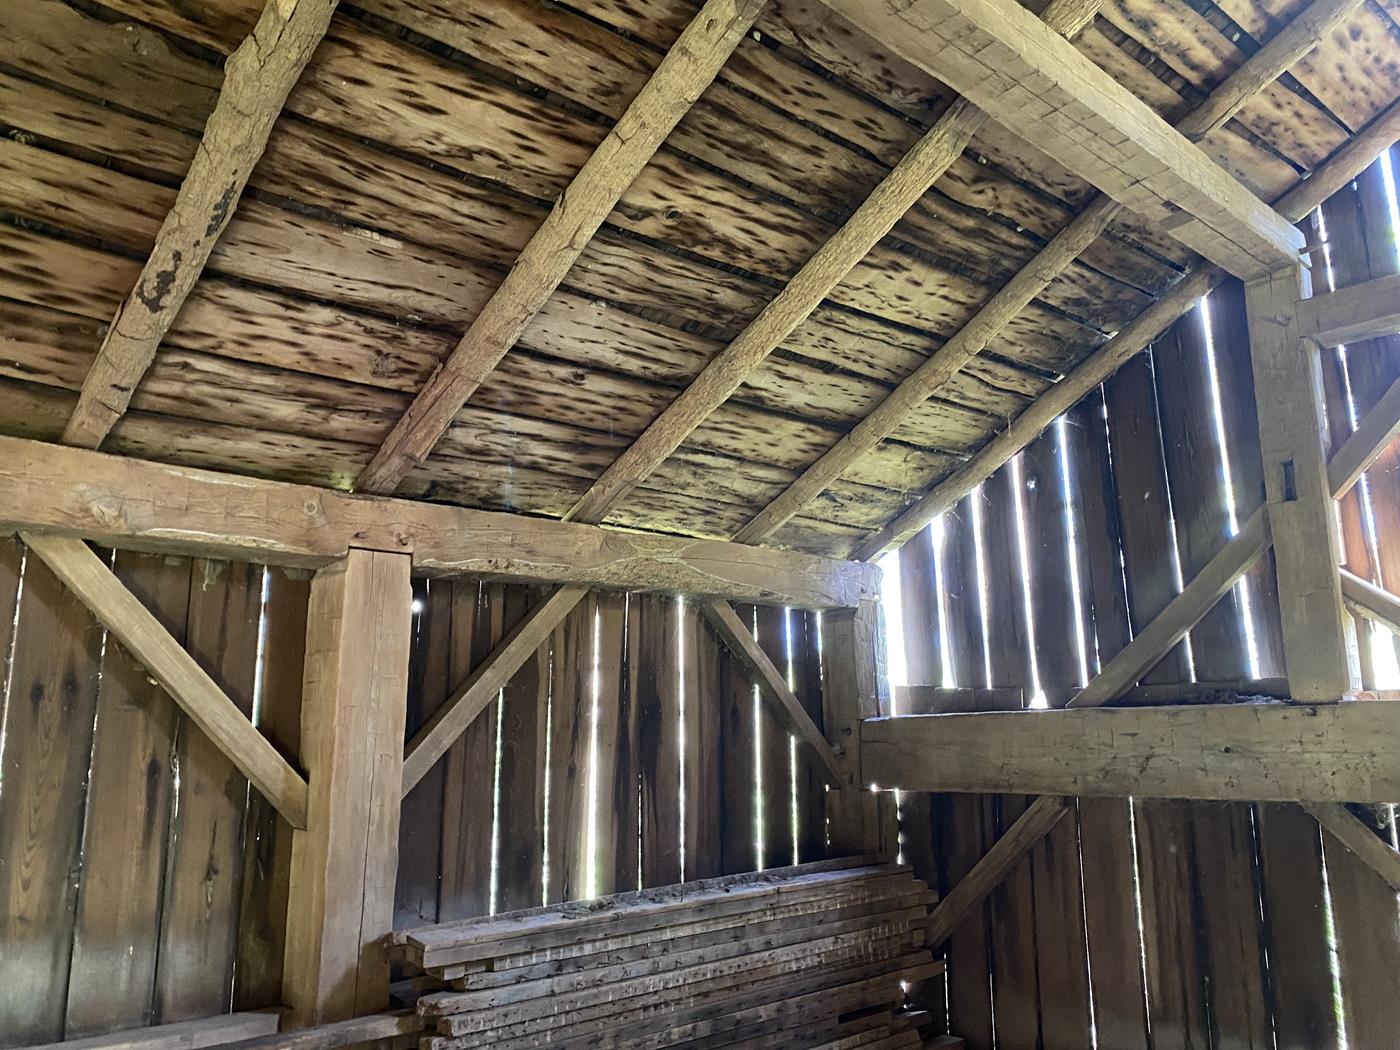 https://www.ohiovalleybarnsalvage.com/images/Historic Scott Salvaged Barn Frame - Your Source For Sawn Barn Timbers